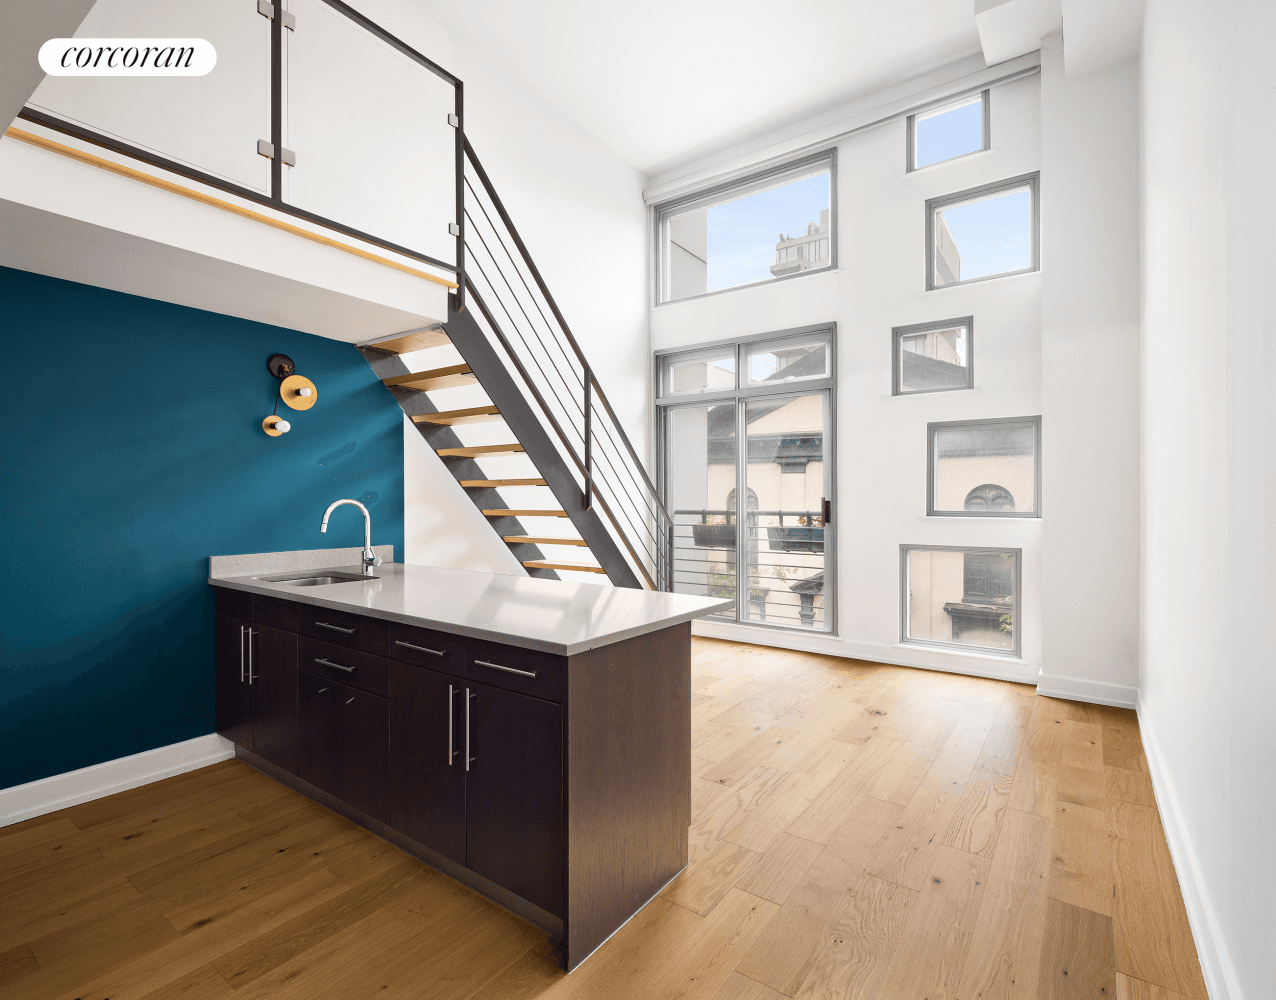 Introducing residence 3H, a fabulous duplex loft for sale at 200 South 2nd Street in the very heart of Williamsburg Brooklyn.